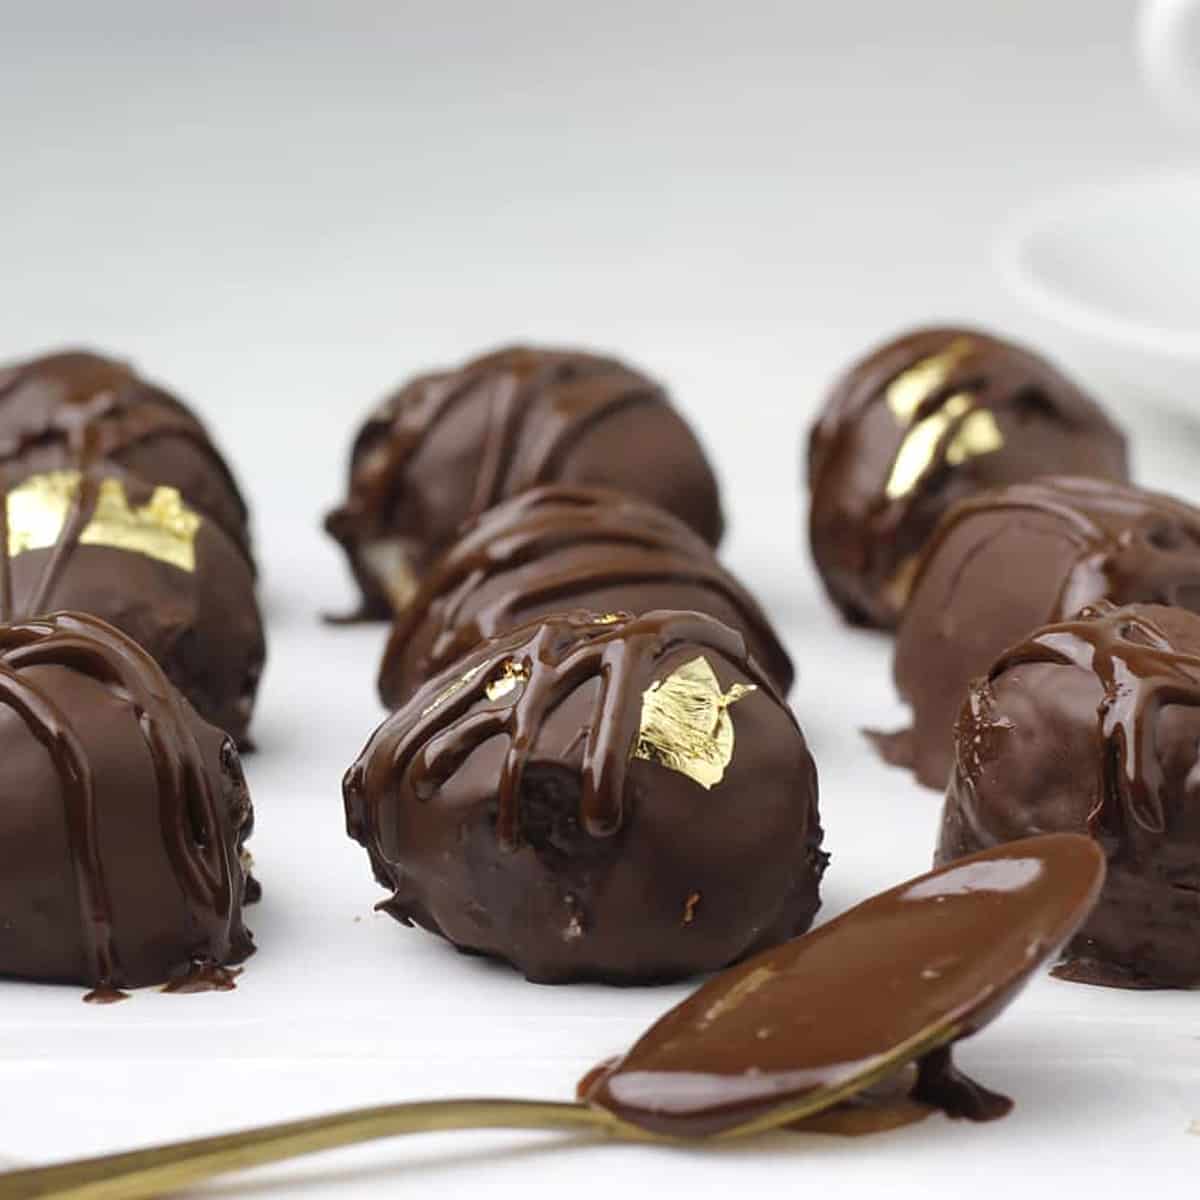 chocolate coconut balls in a row with a drizzle of chocolate